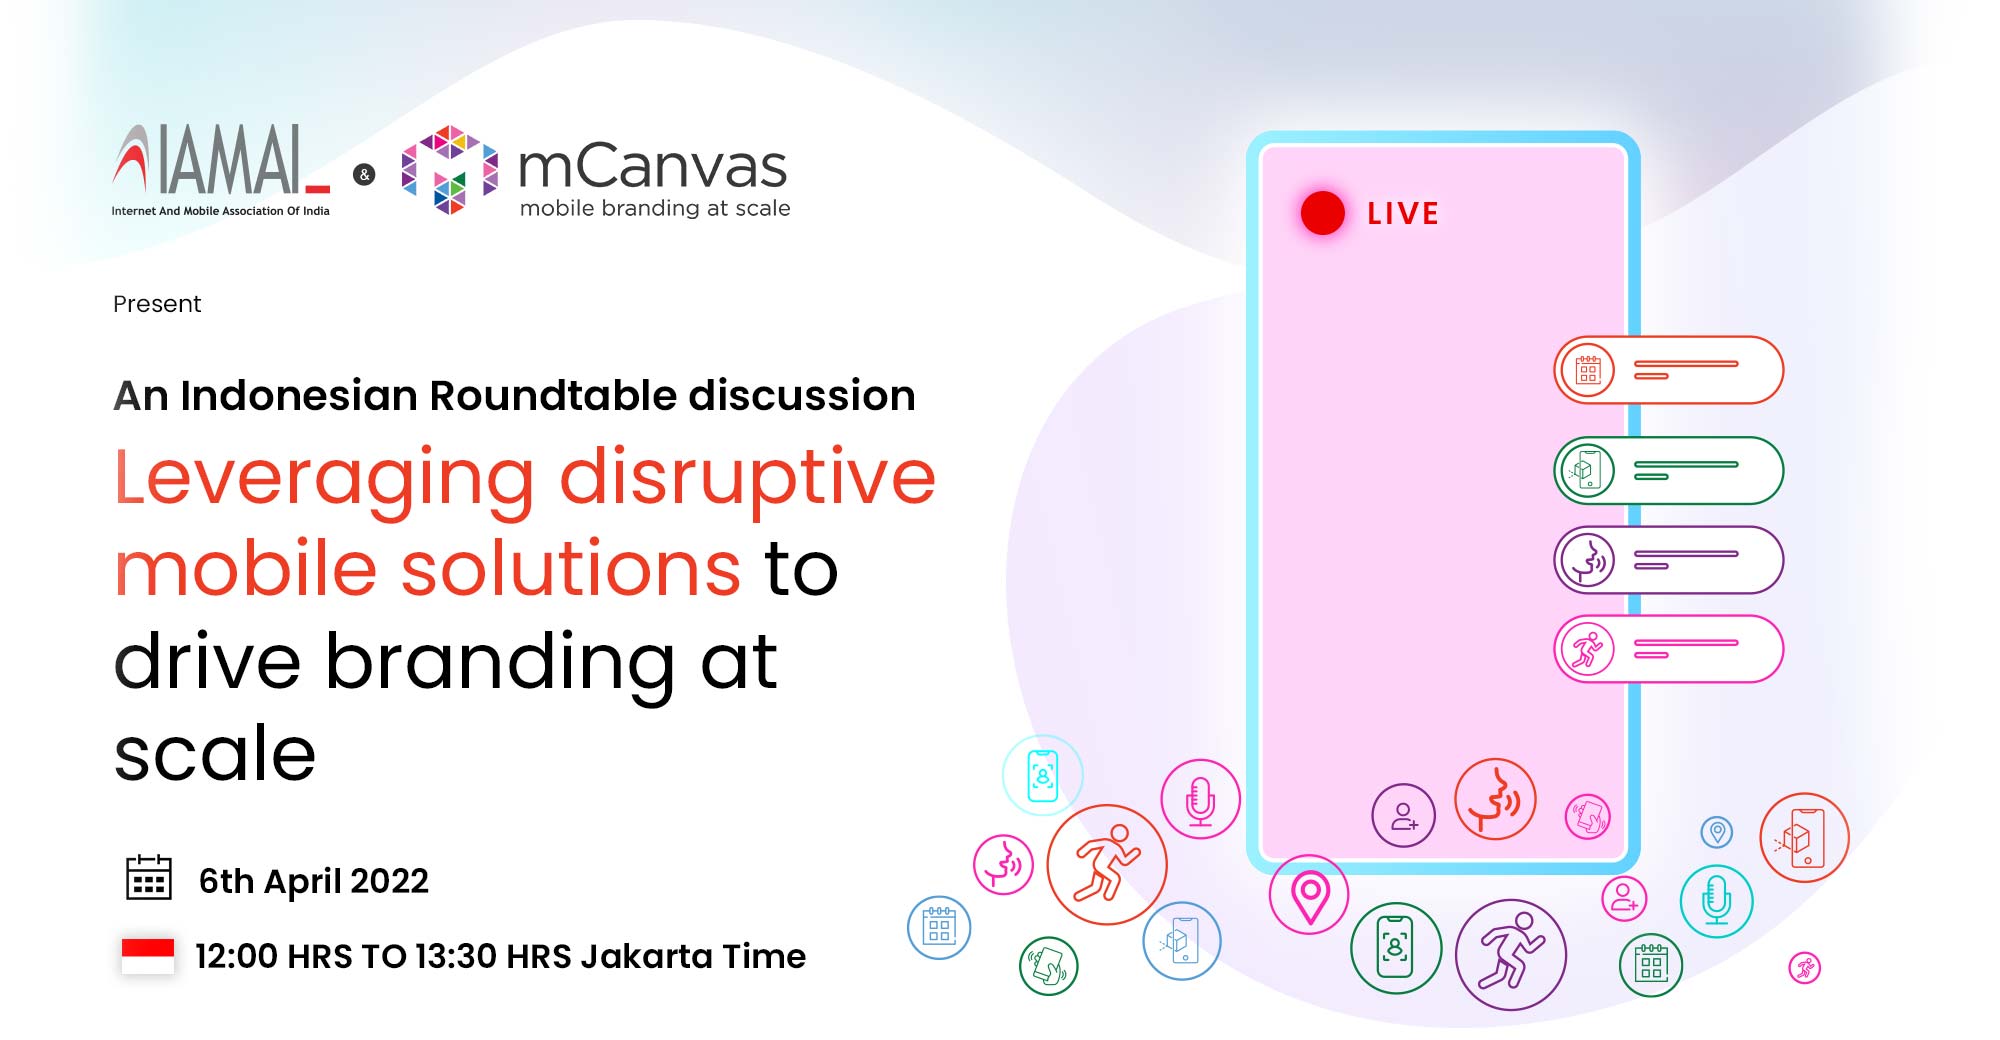 An Indonesian Roundtable discussion Leveraging disruptive mobile solutions to drive branding at scale